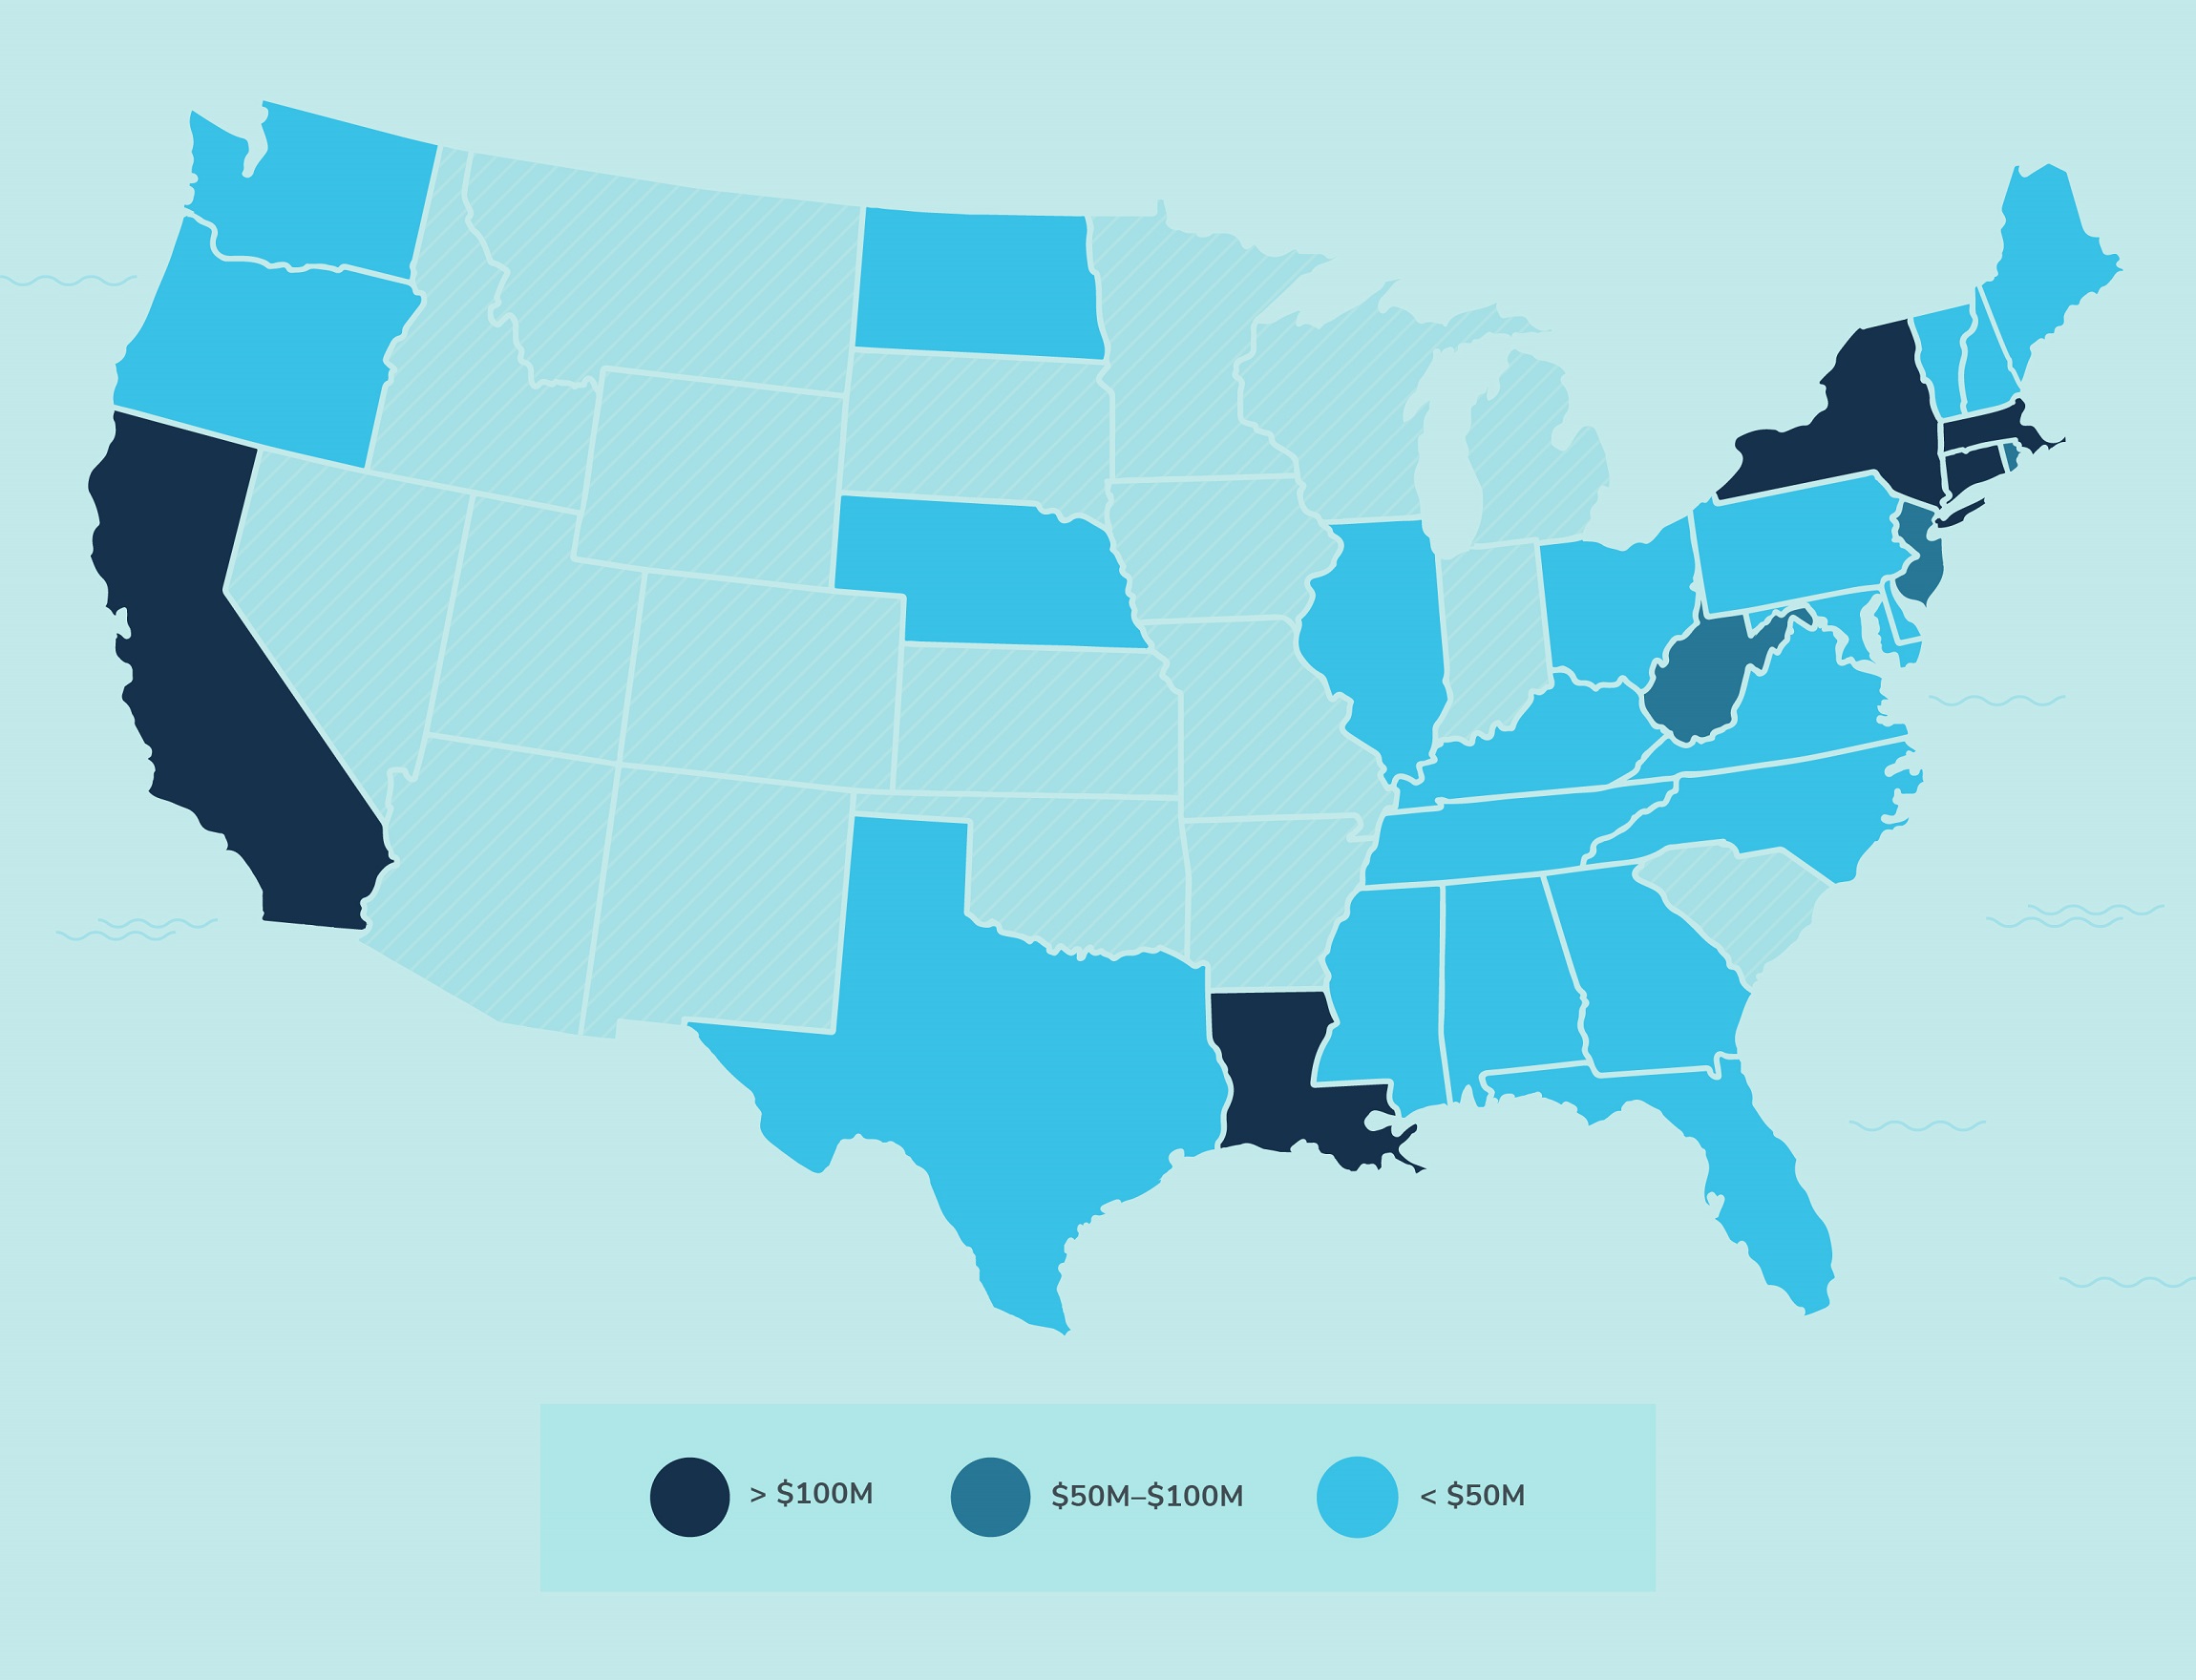 Map of the US indicating the 29 states where BlueHub has made investments. The states with the highest volume of lending at CA, MA, NY, LA and CT.